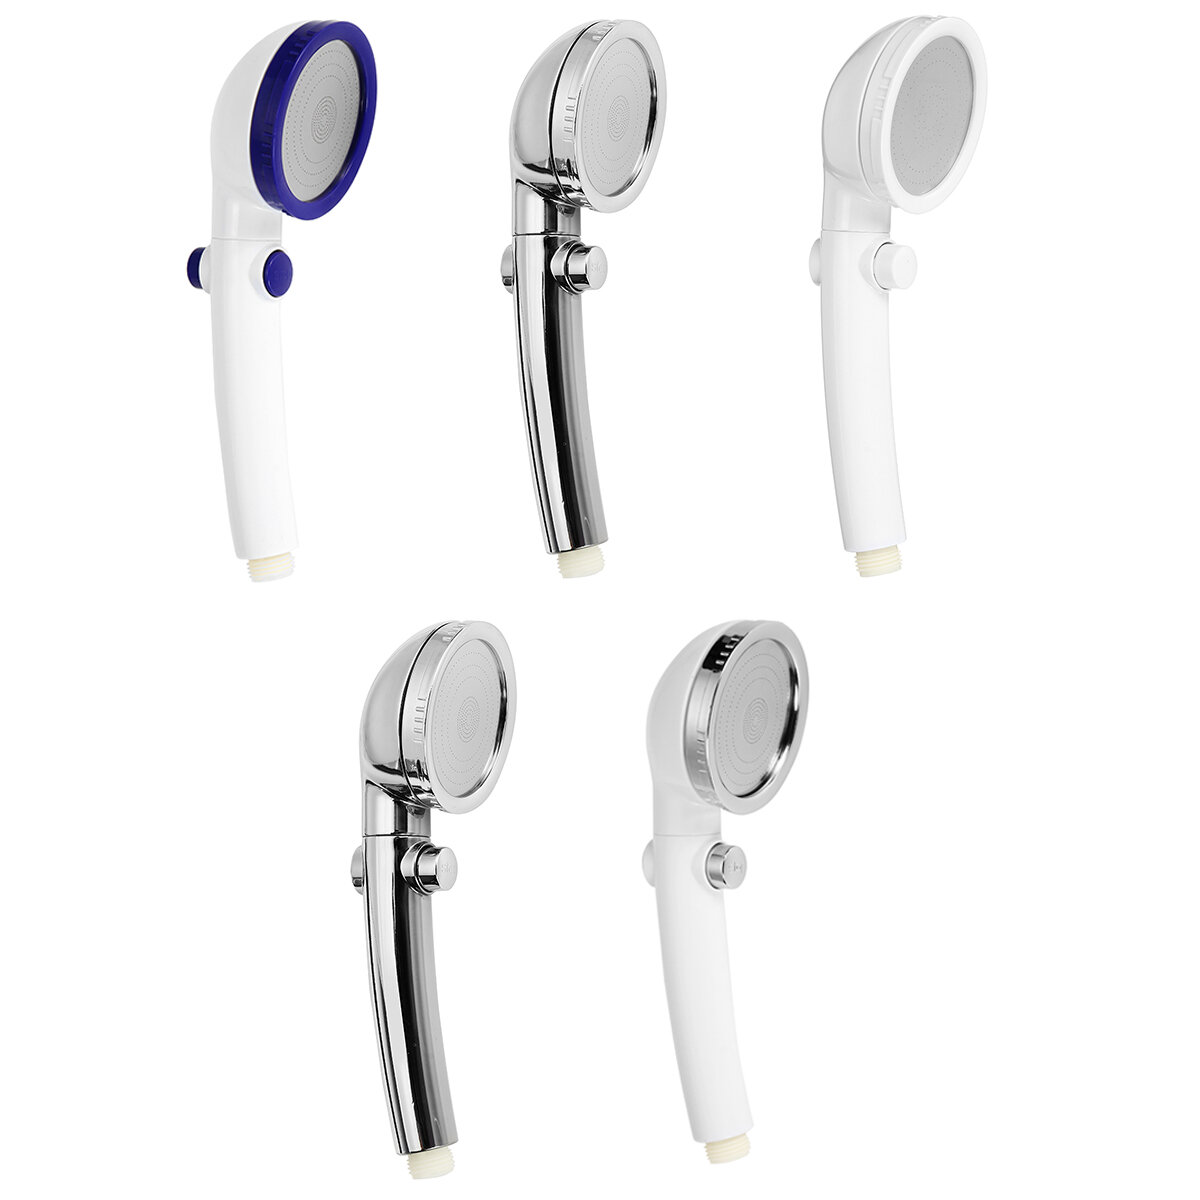 One Button Water Stop Pressurized Shower Shower Nozzle Household Hand Held Shower Rain Shower Nozzle